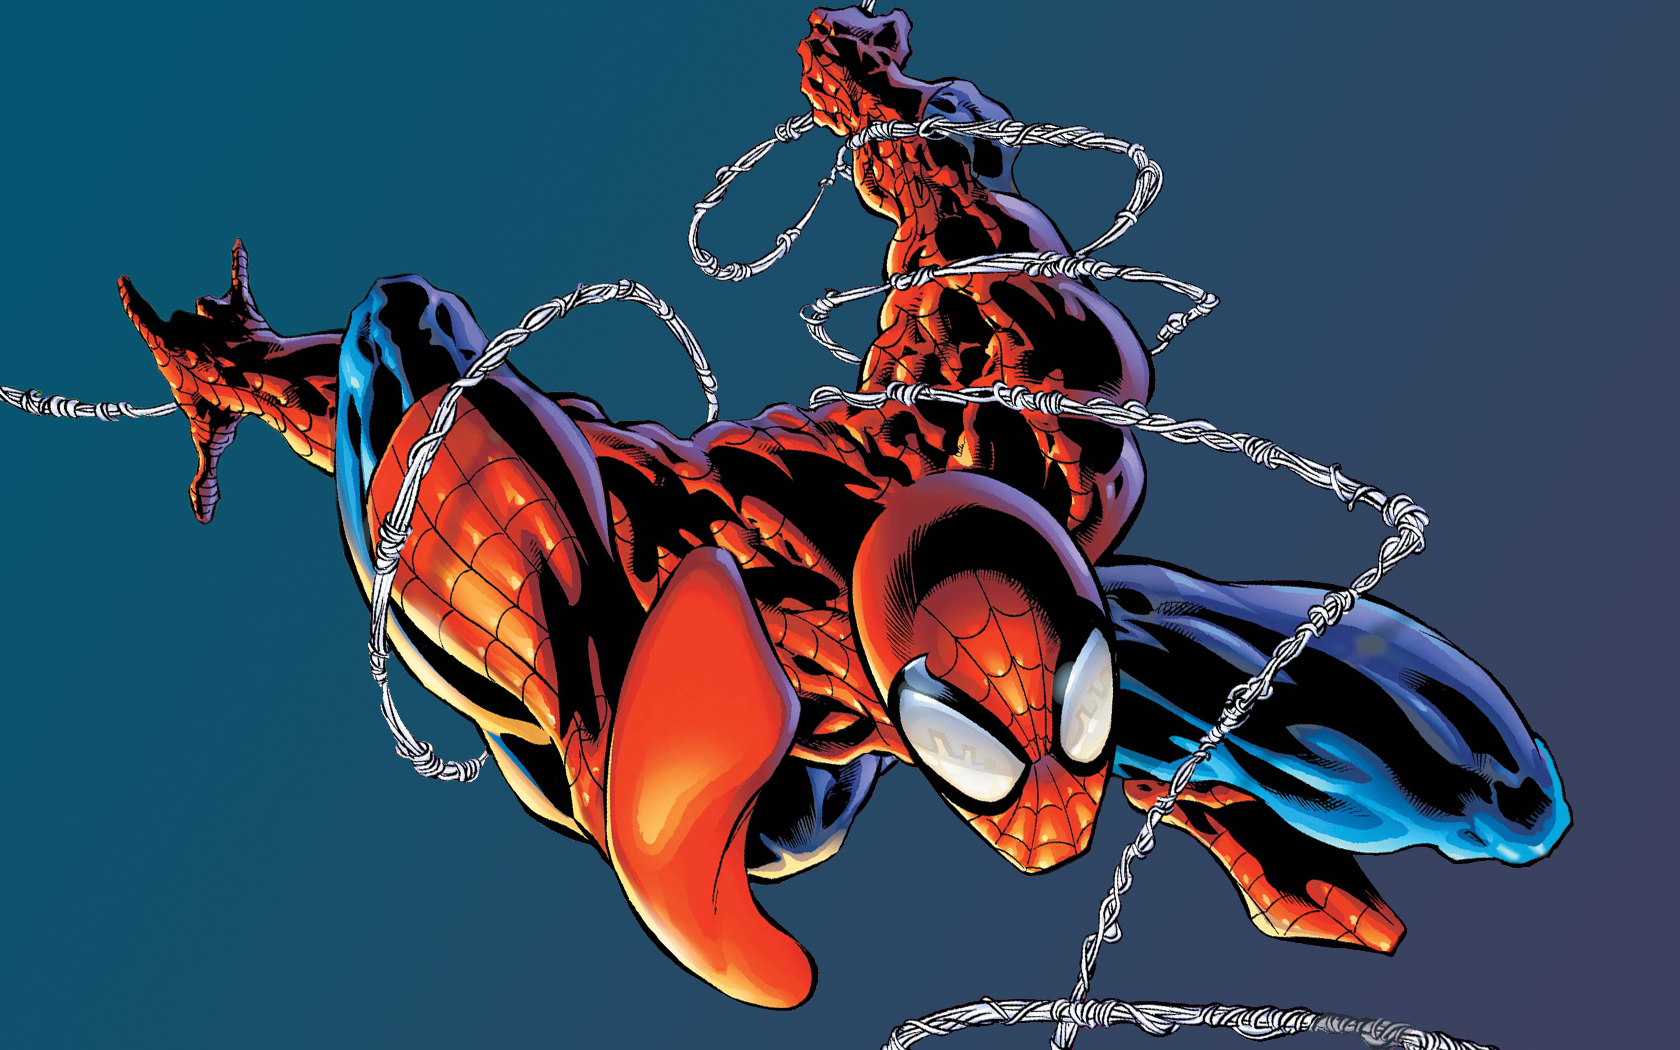 Possible Actors To Be the New Spider-Man – The Comic Book Cast